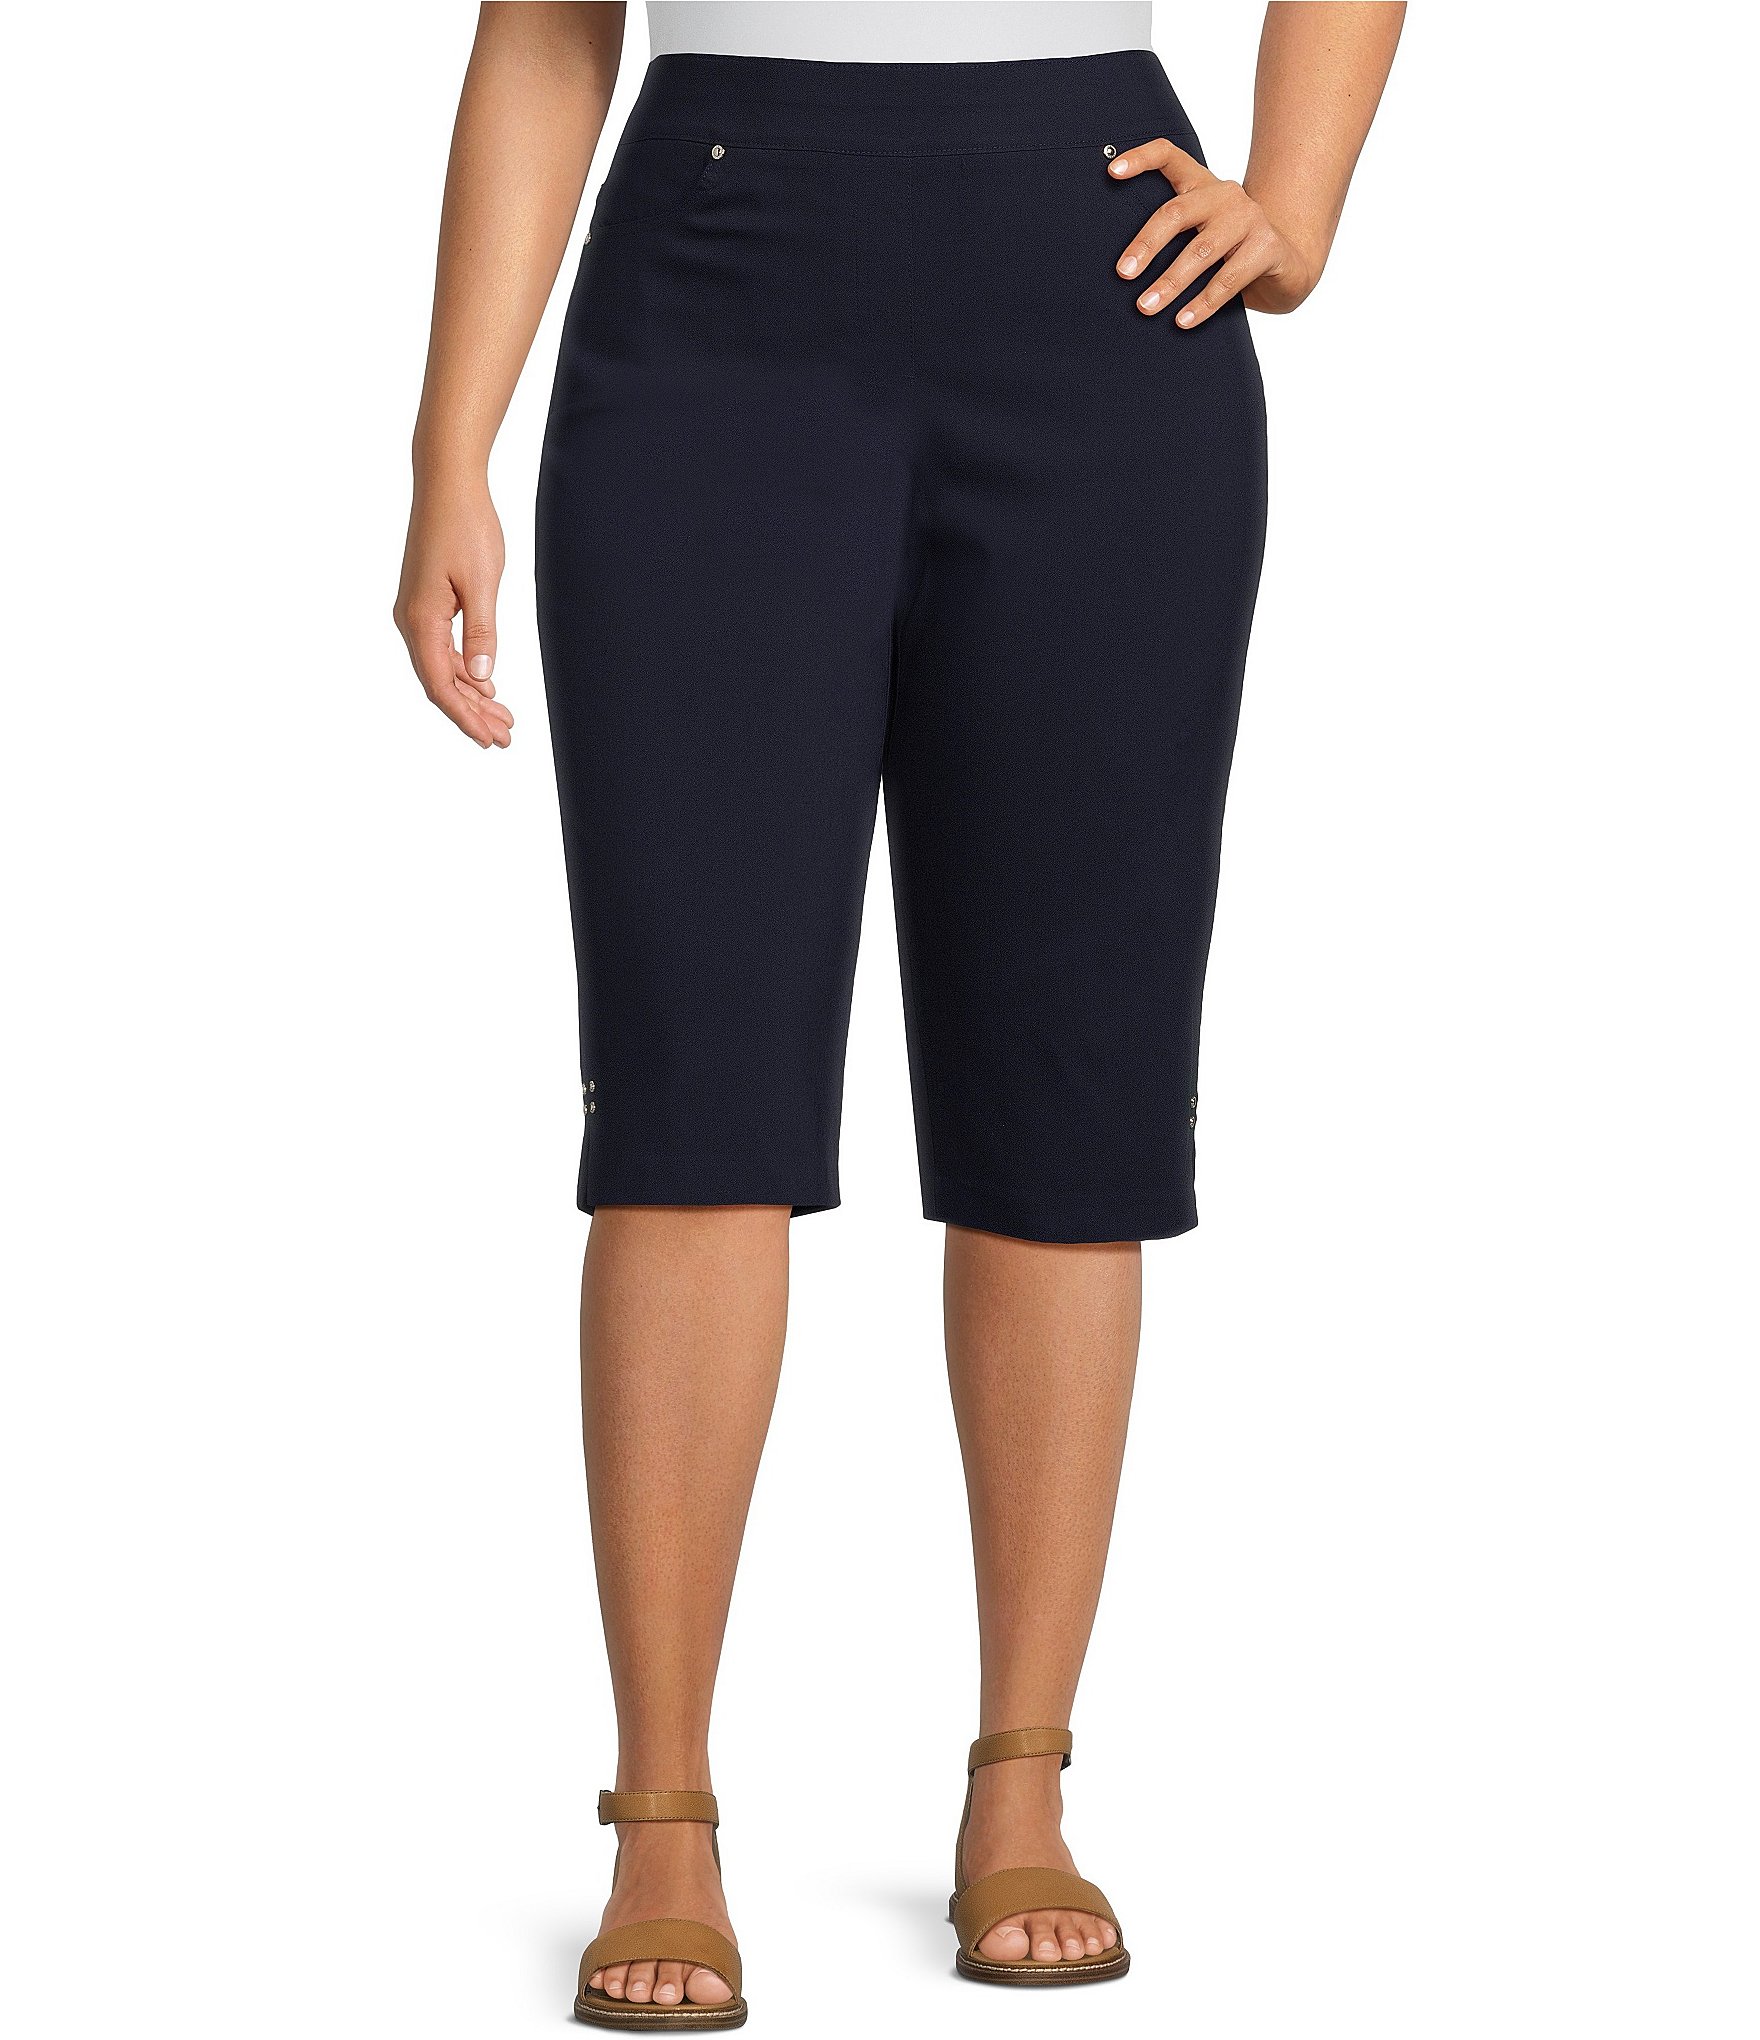 Allison Daley Plus Size Stretch Pull-On Straight Leg Pants